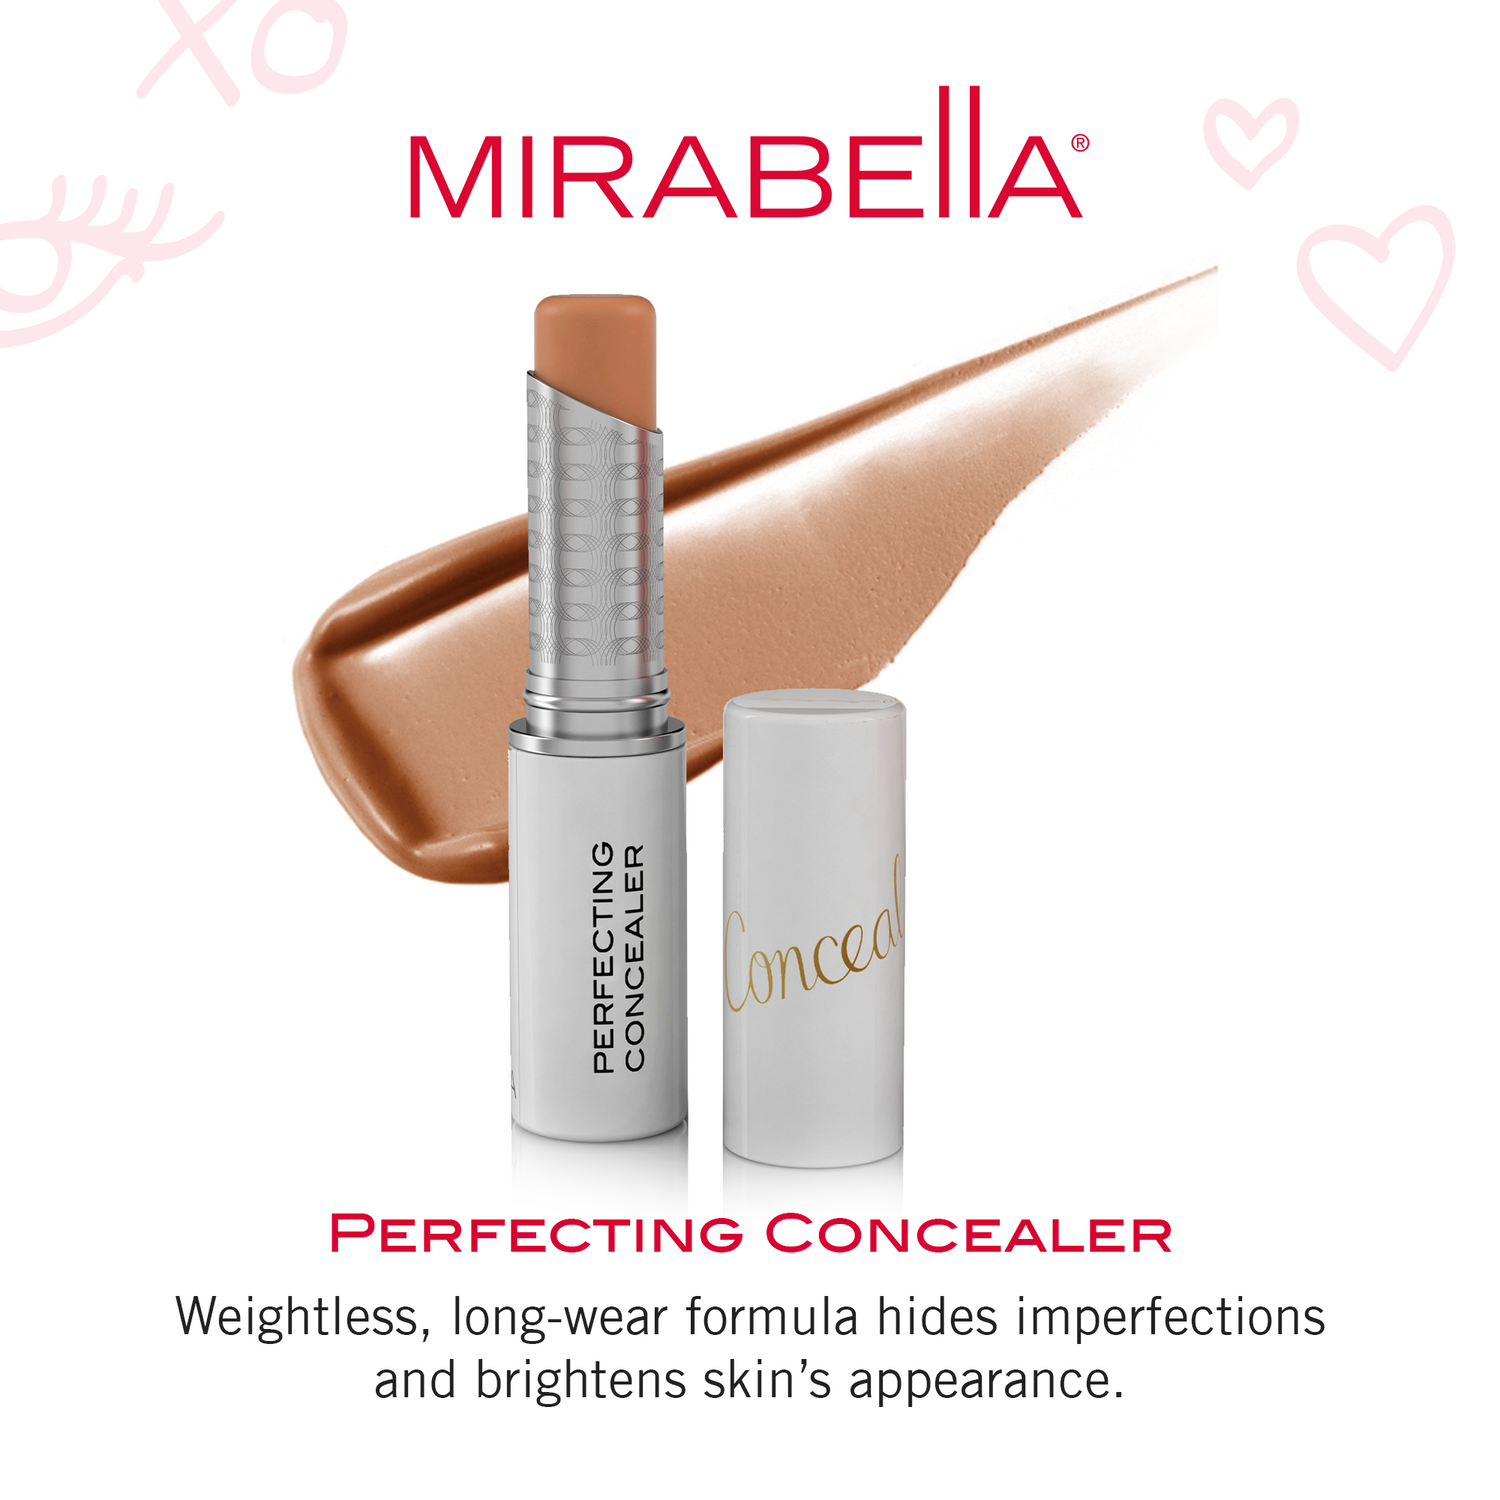 Mirabella Beauty Perfecting Concealer - Weightless, Cruelty-free Concealer Makeup Stick for Face - Shade IV